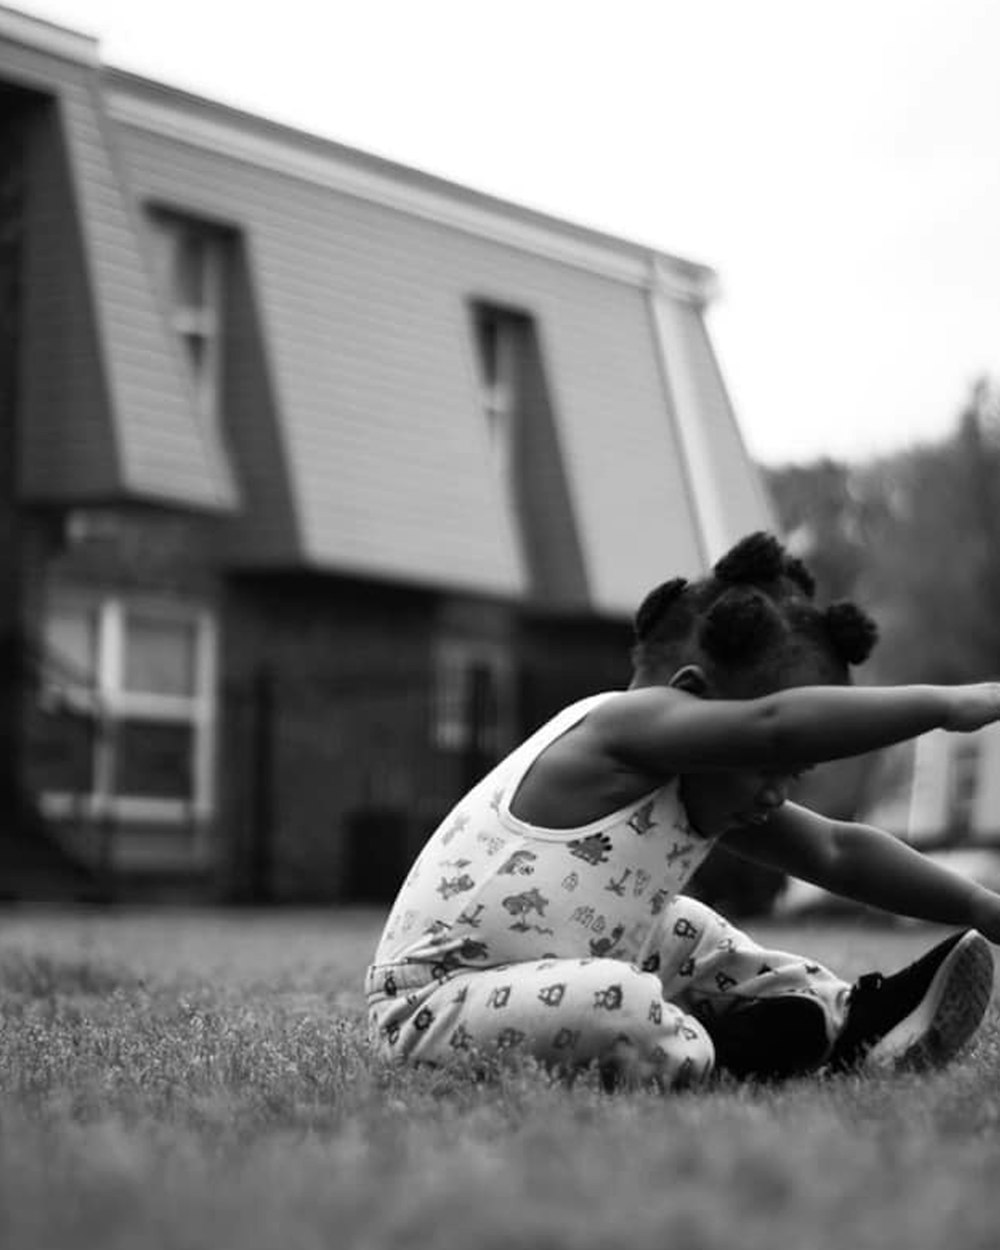 grayscale photo of woman in tank top and pants sitting on grass field